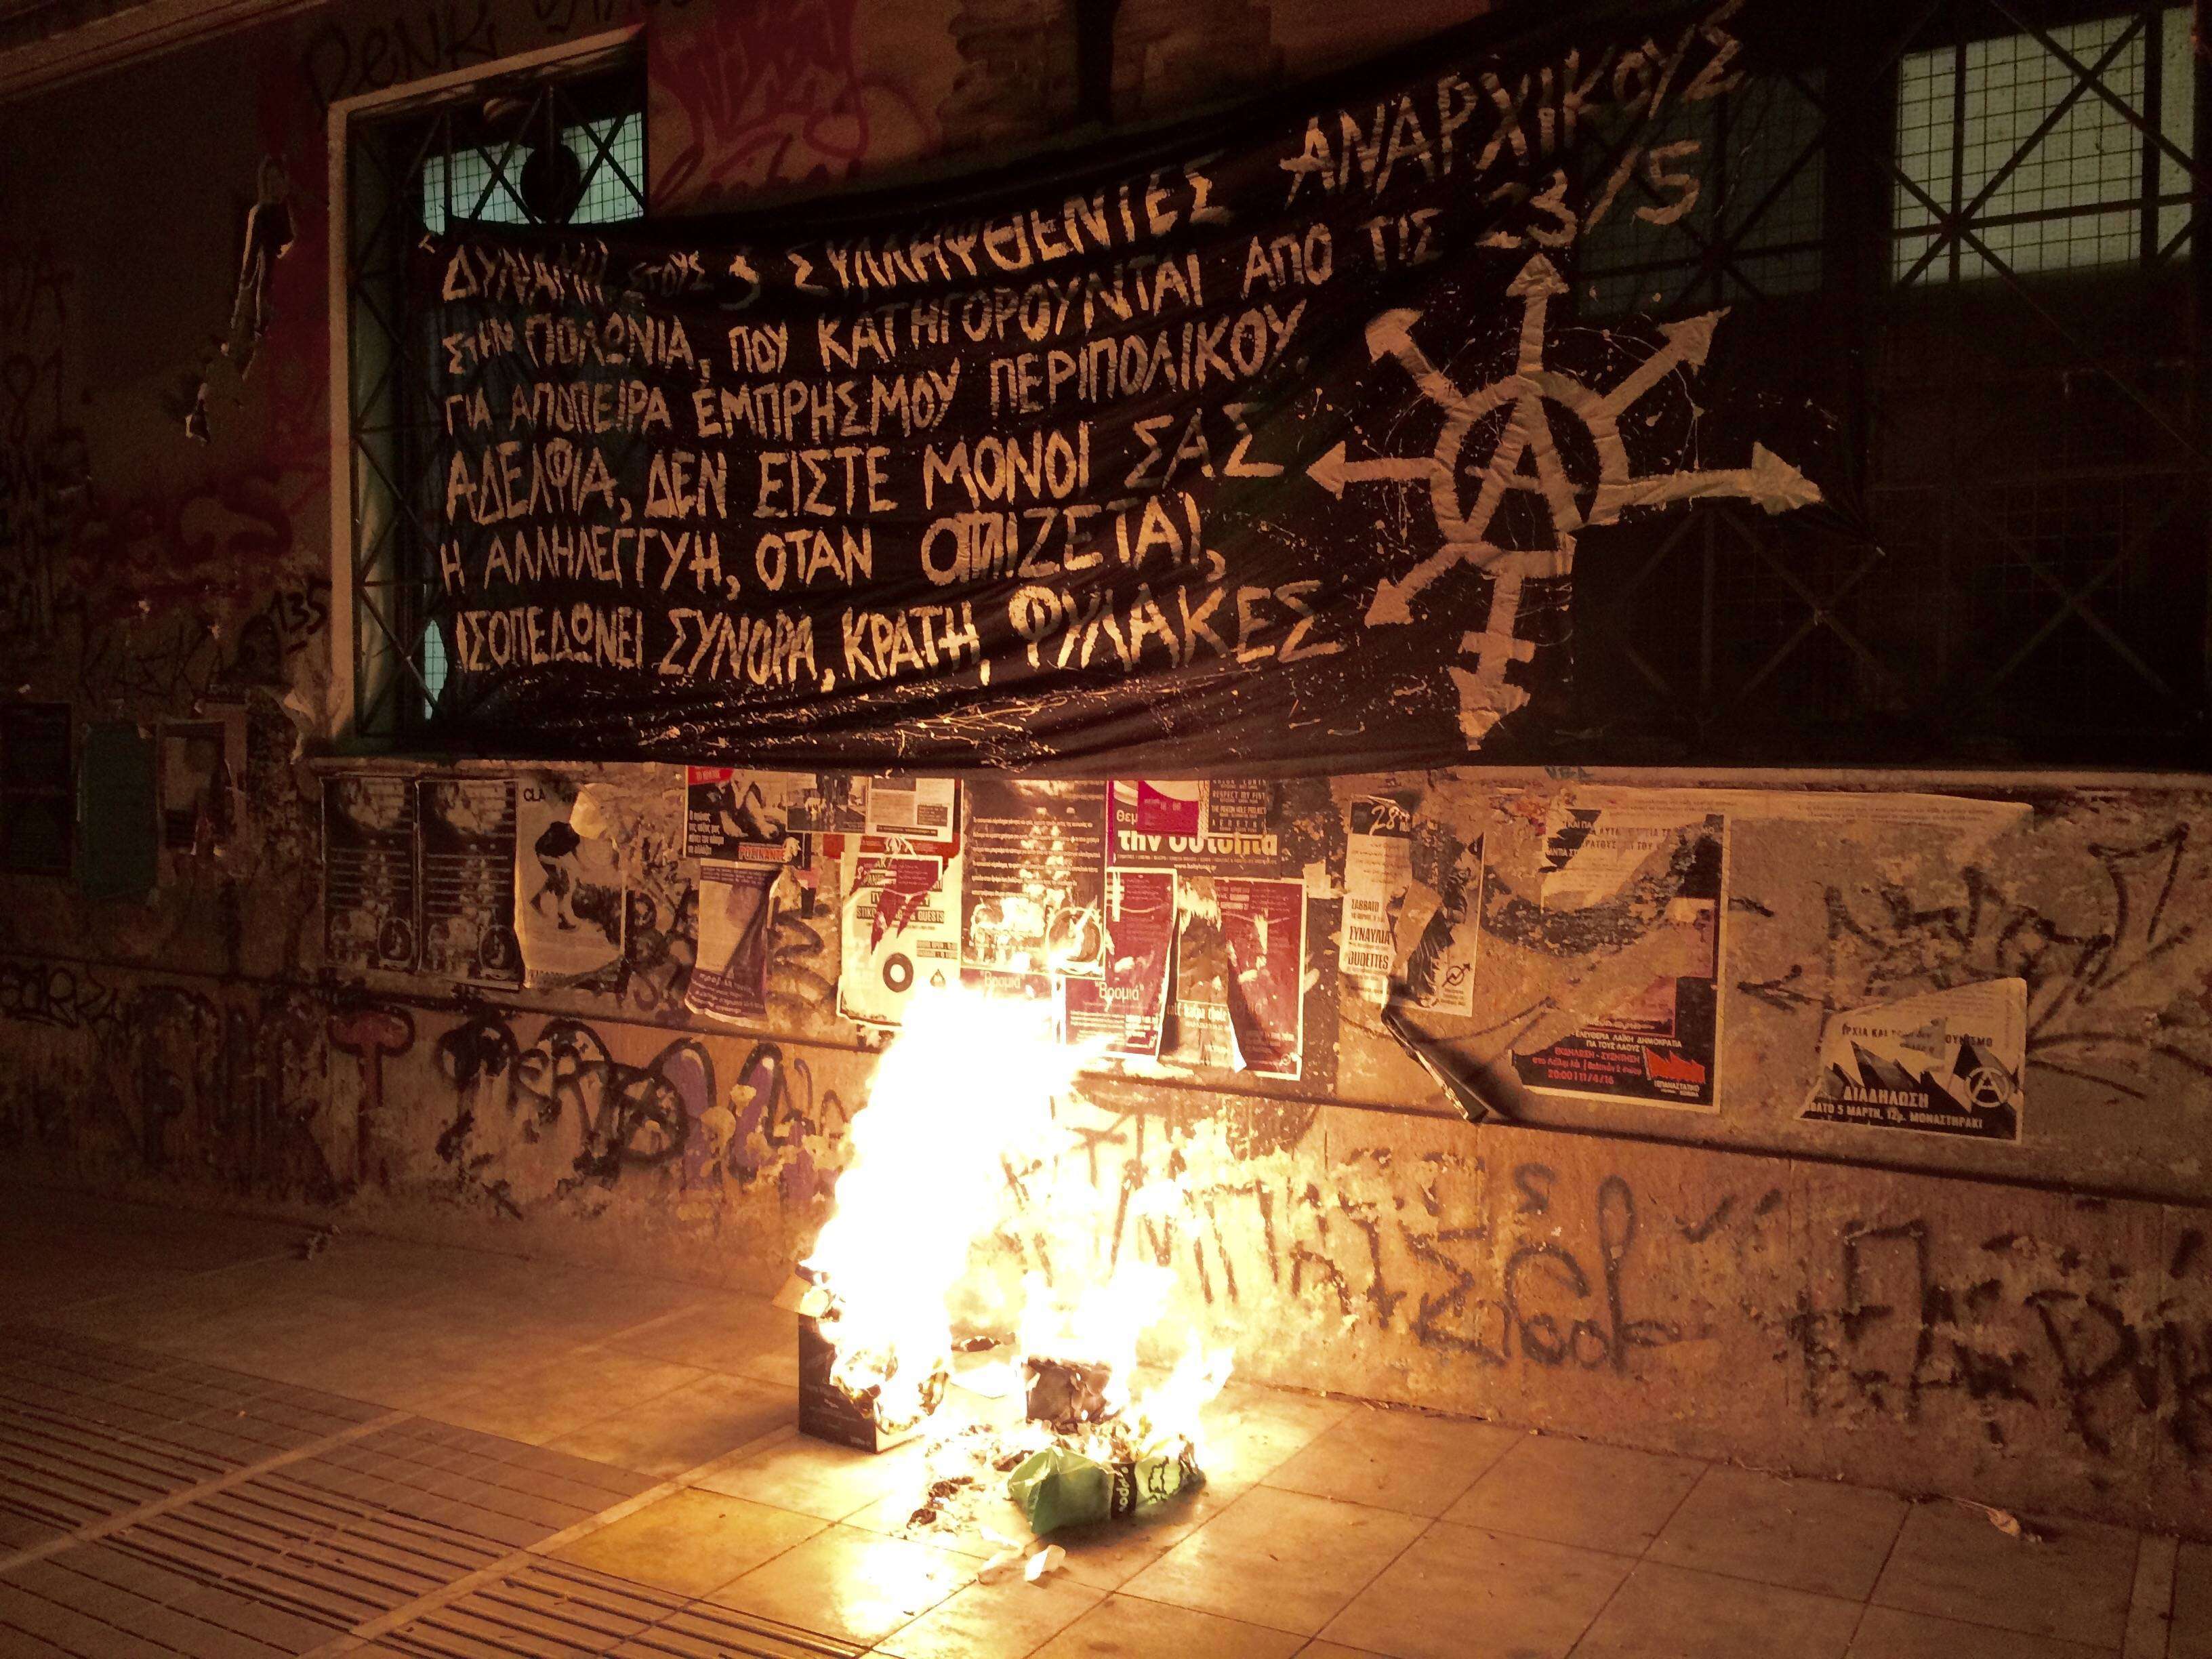 Athens: Banner action in solidarity with the three comrades arrested in Warsaw, Poland